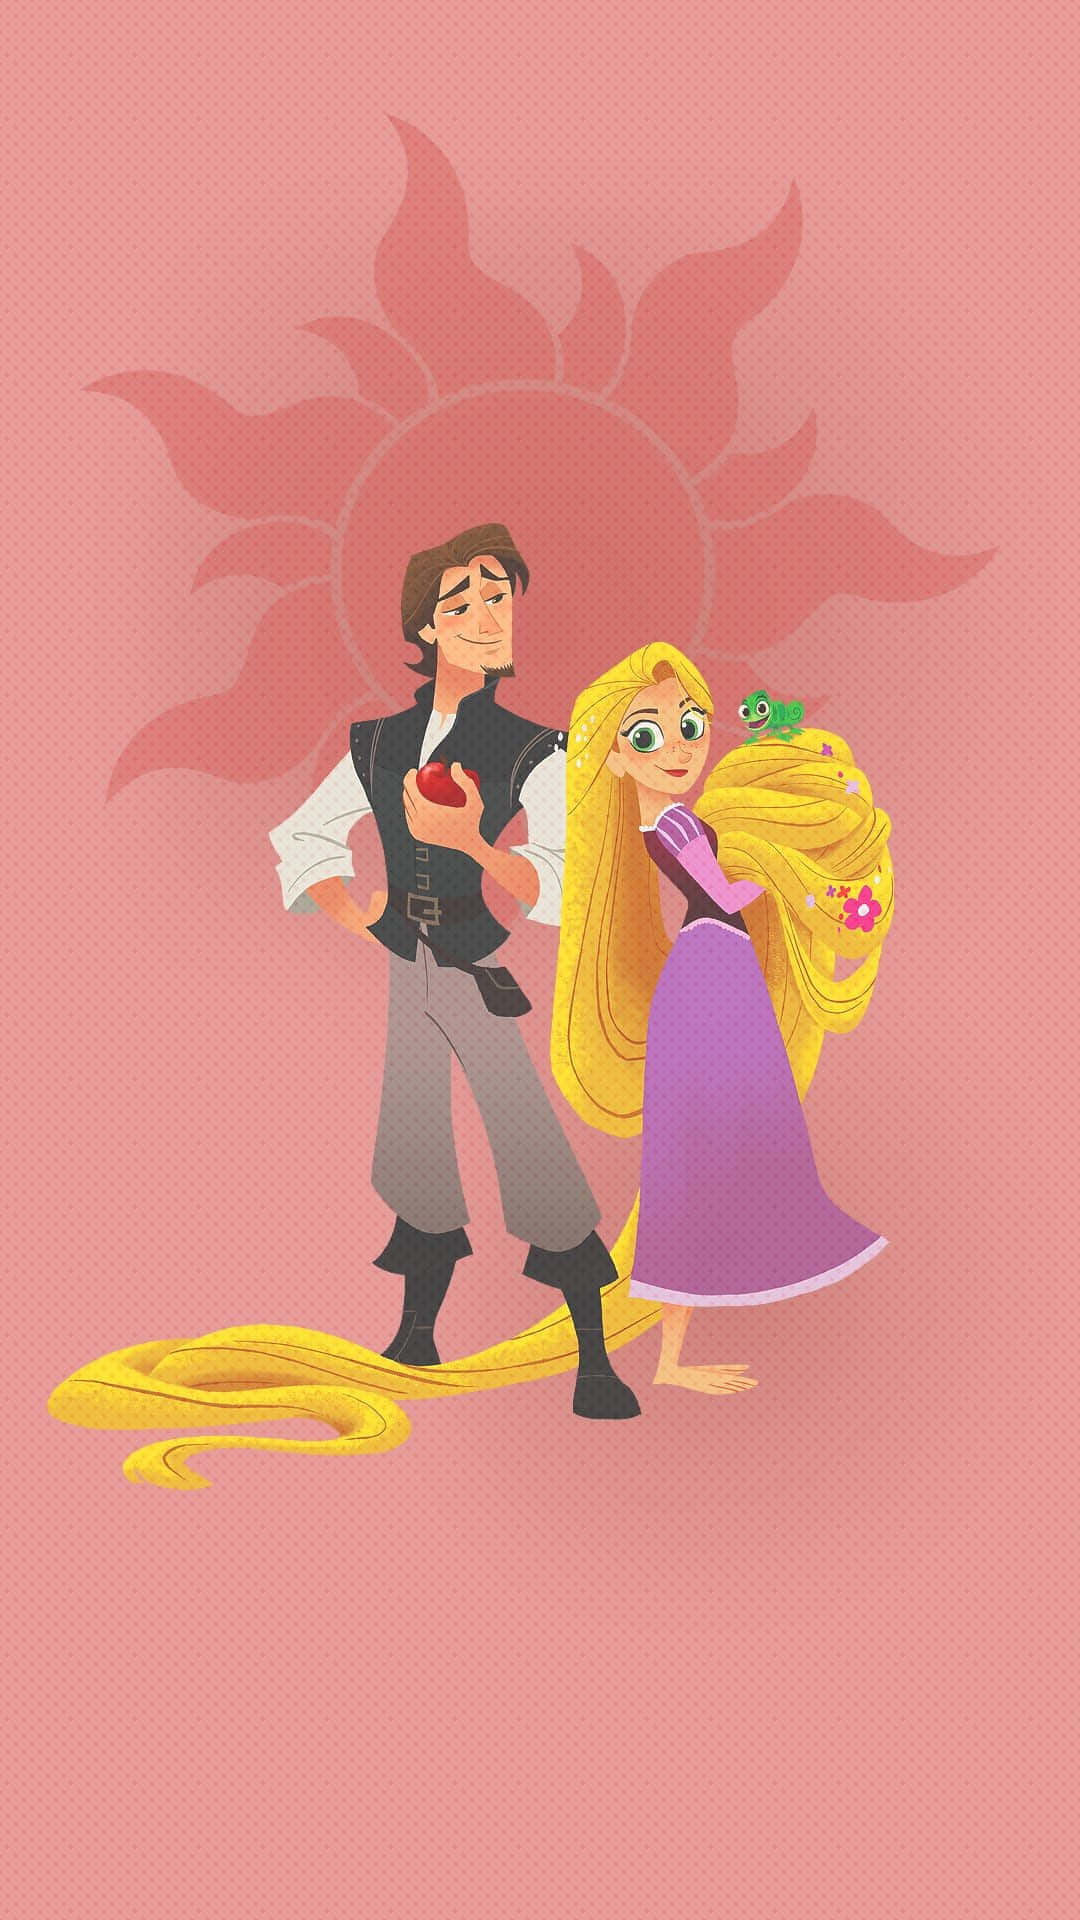 Rapunzel uses her magical golden hair to float away in Tangled